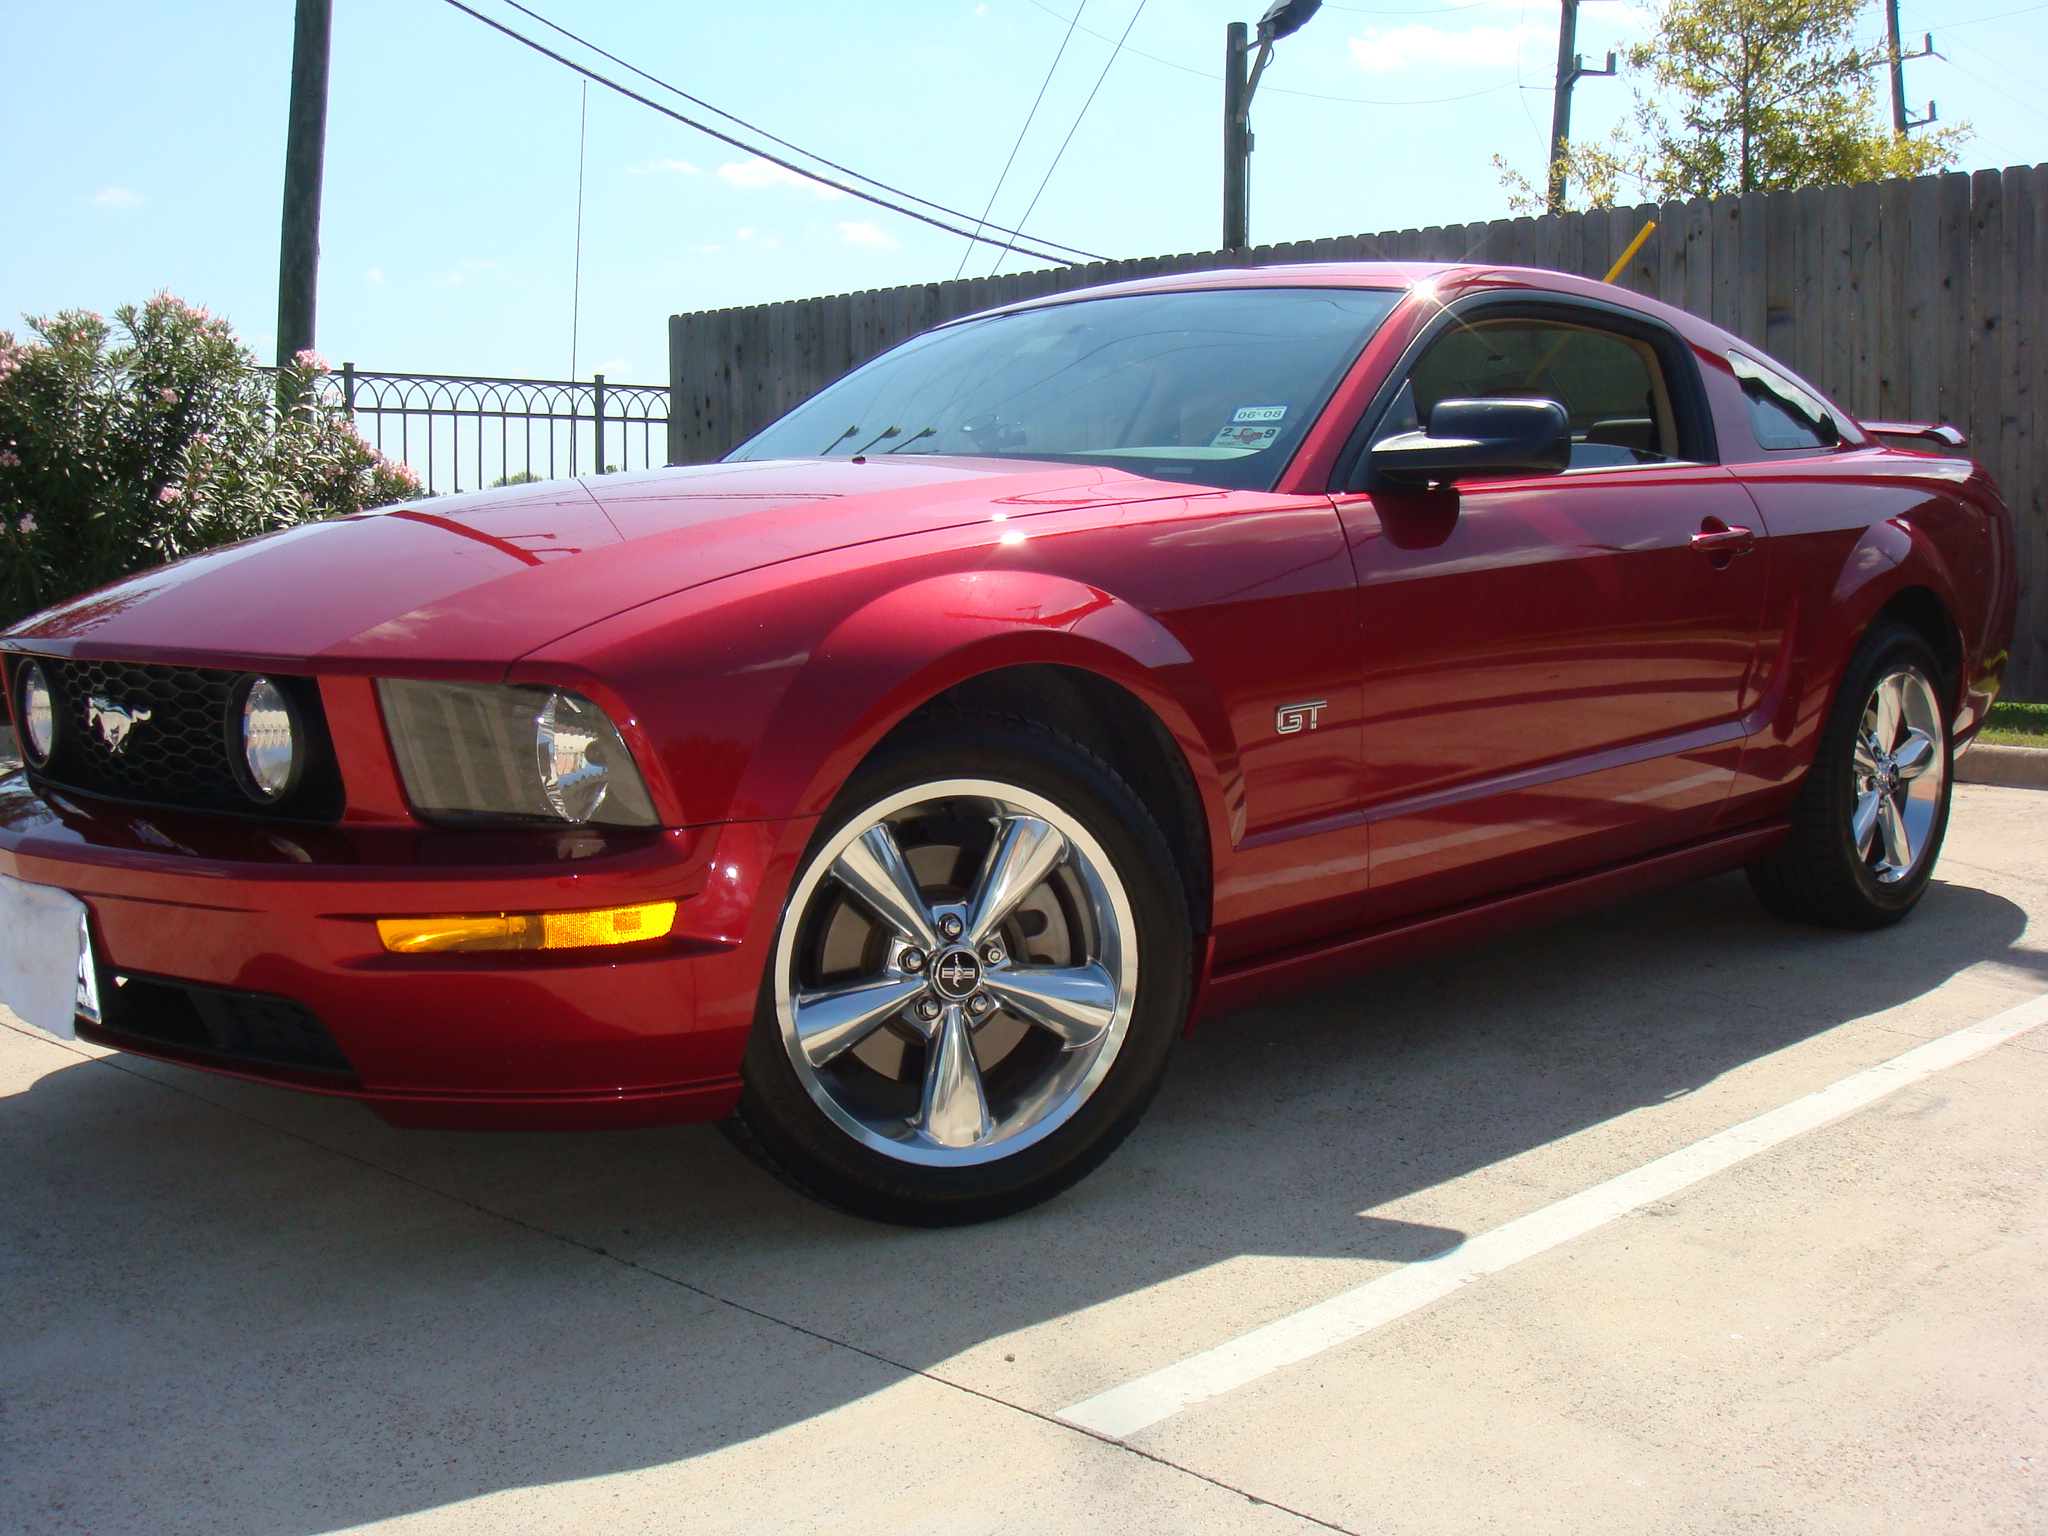 2006 Ford mustang gt 0-60 times #8